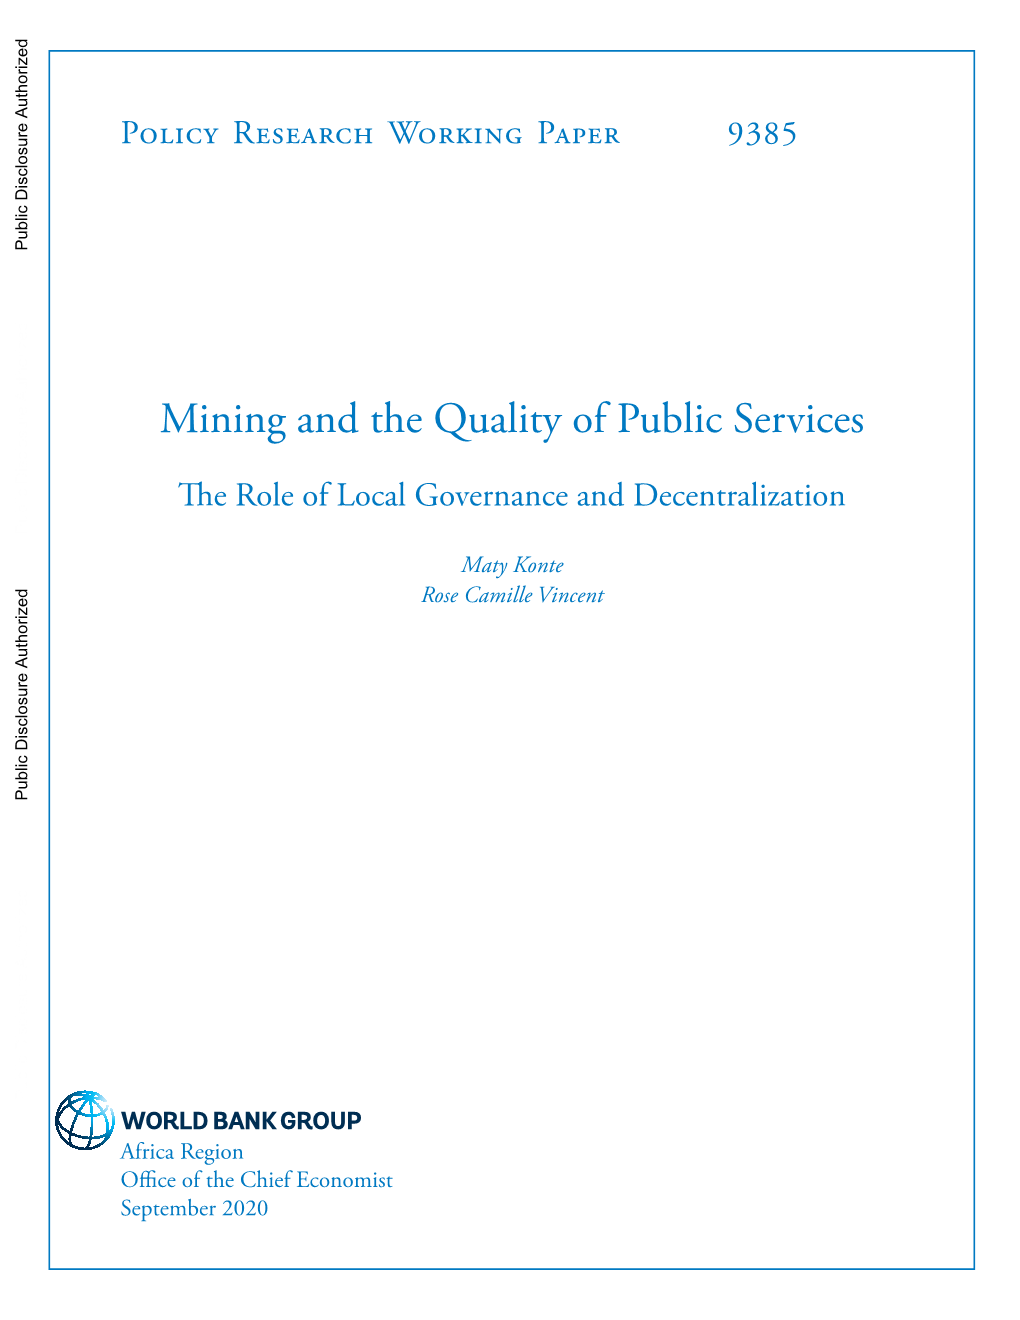 Mining and the Quality of Public Services